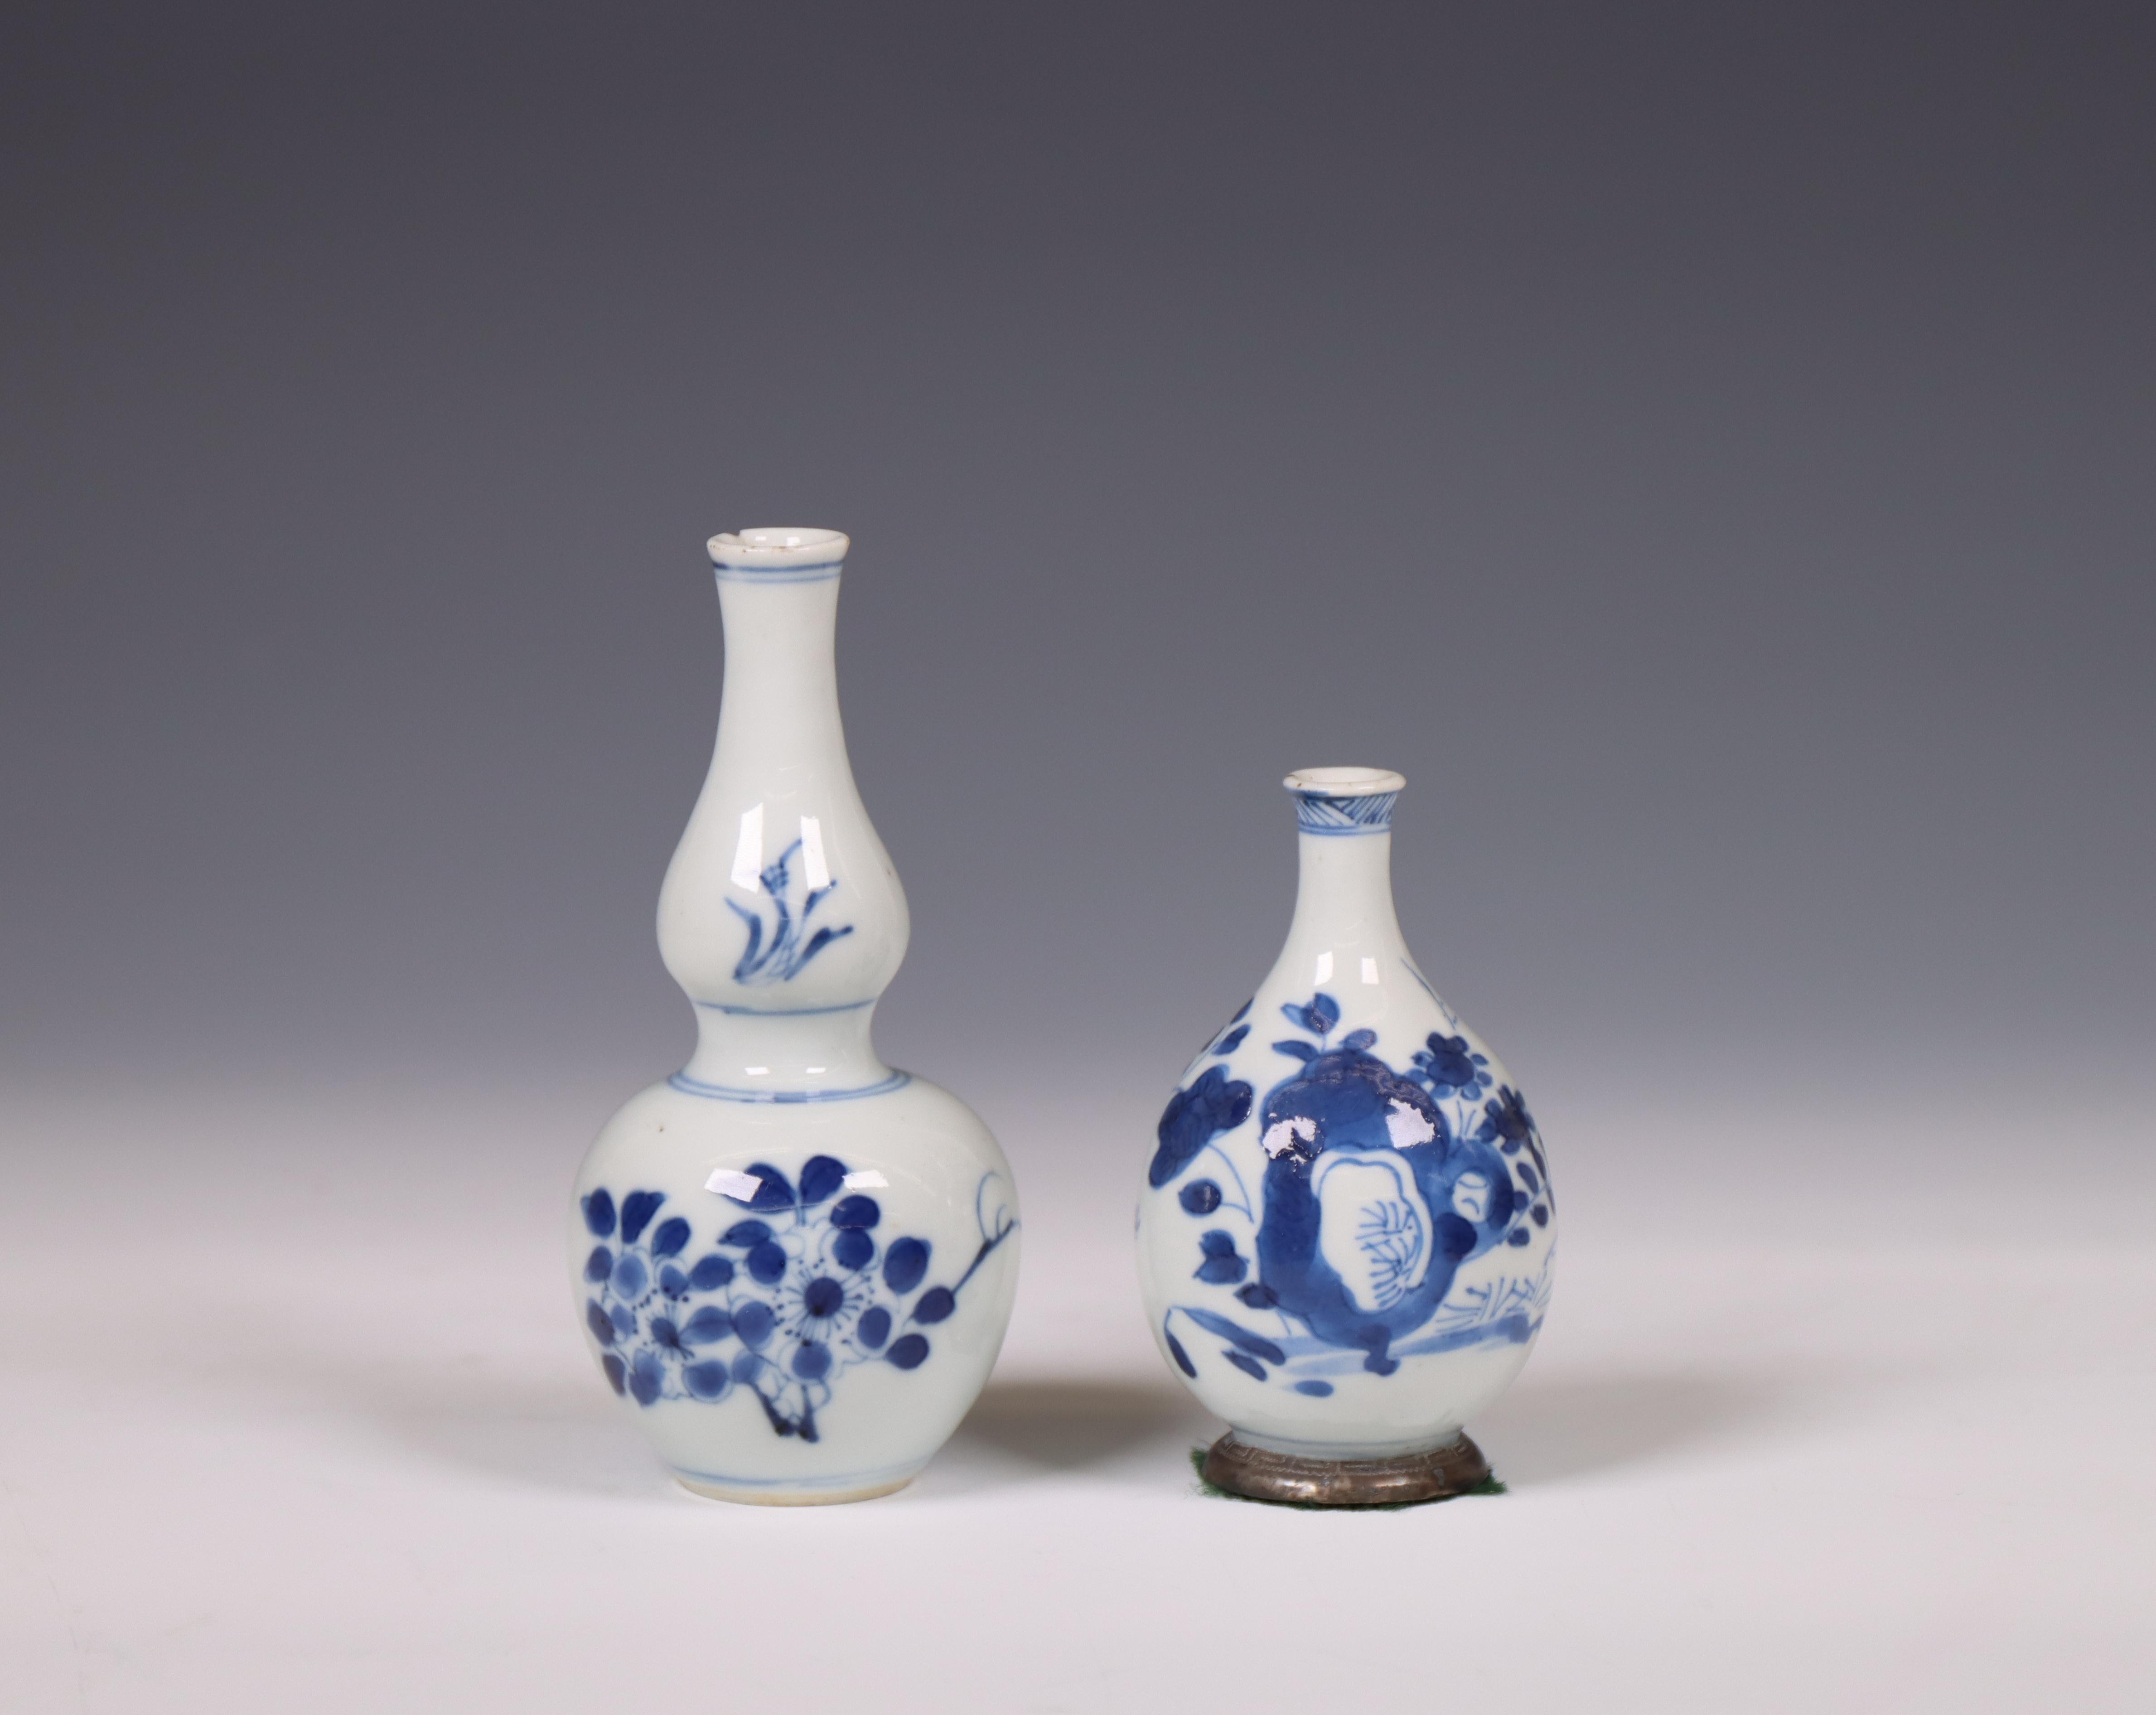 China, two blue and white porcelain vases, Kangxi period (1662-1722),